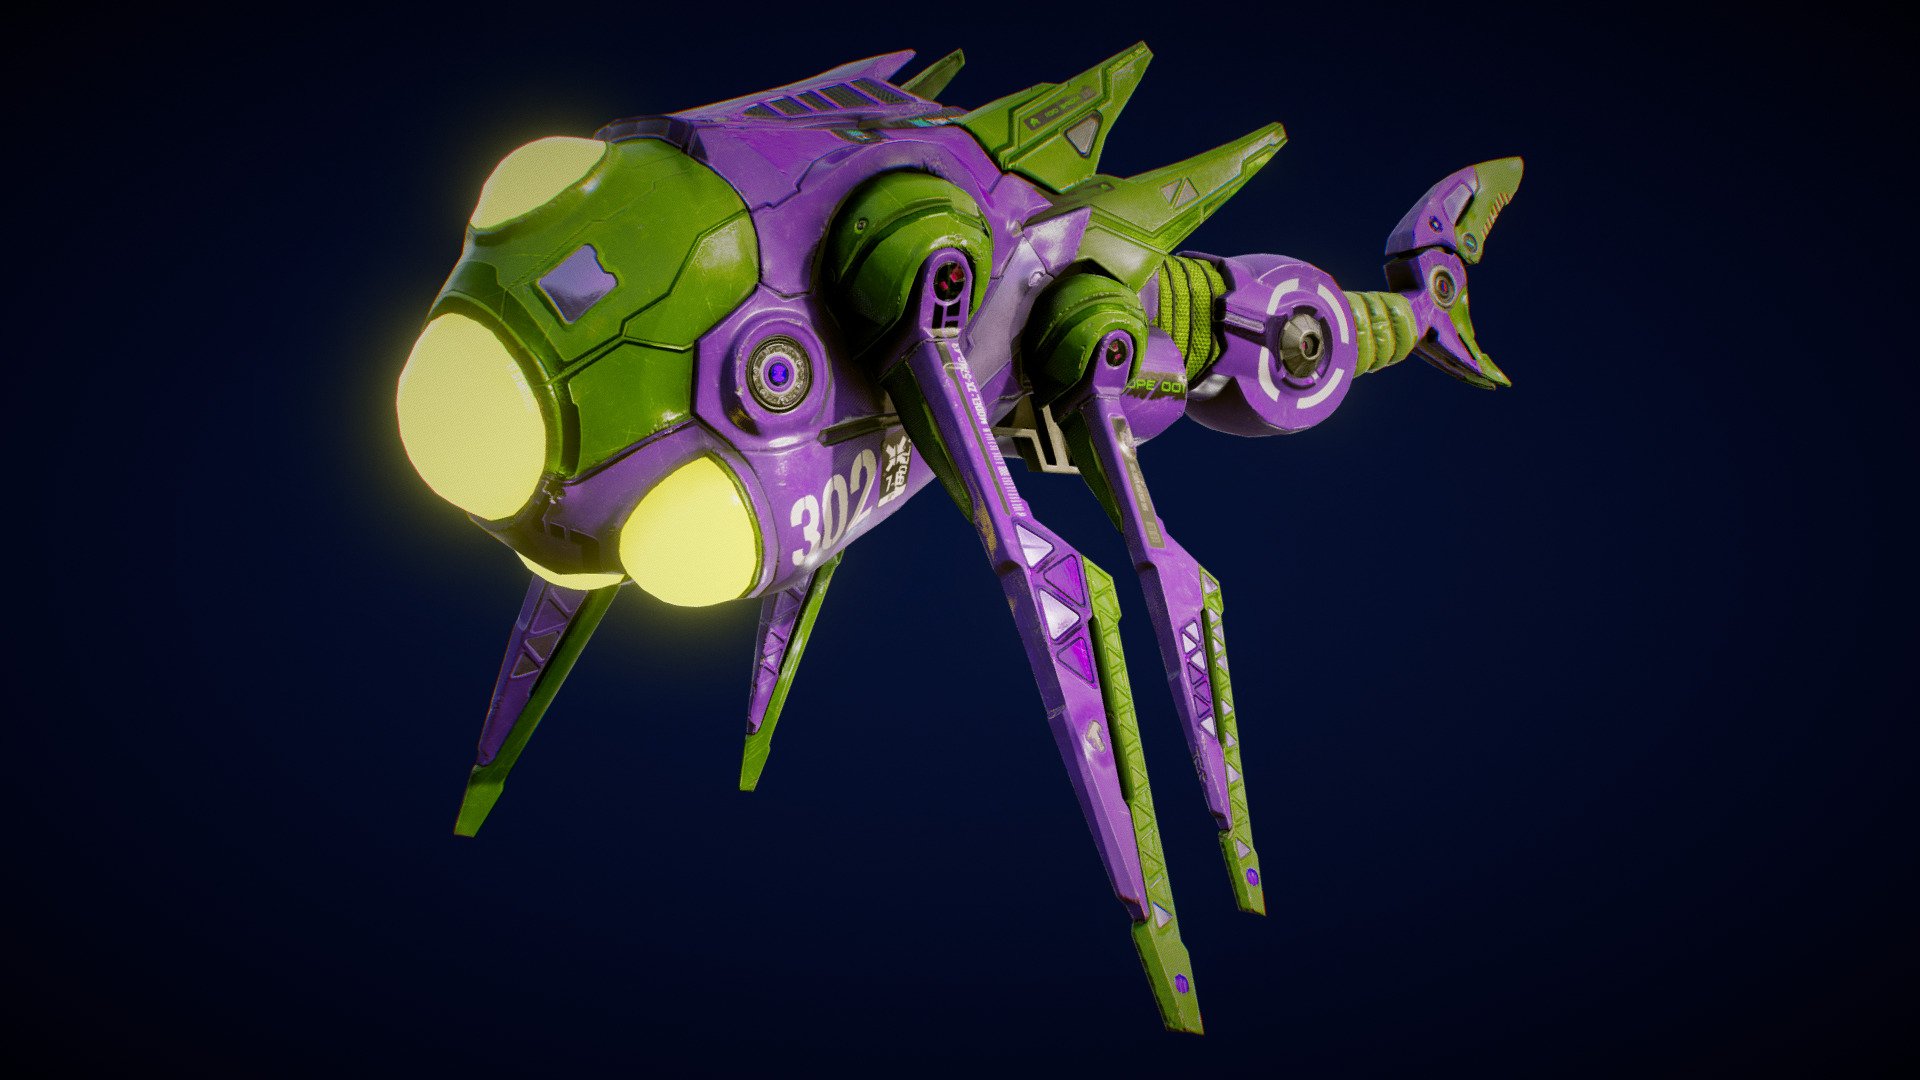 An orignal Game Character/Vehicle (I really don't know if this thing is alive or you pilot it) desgin 
This cholor scheme is inspired by the EVA unit 01 from NGE

A single PBR Material of 4096x4096px using:
* Color map
* Metalness map
* Roughness map 
* a DirectX Normal map
* AO map 
* Emission map

Includes an idling animation to preview the rig 3d model